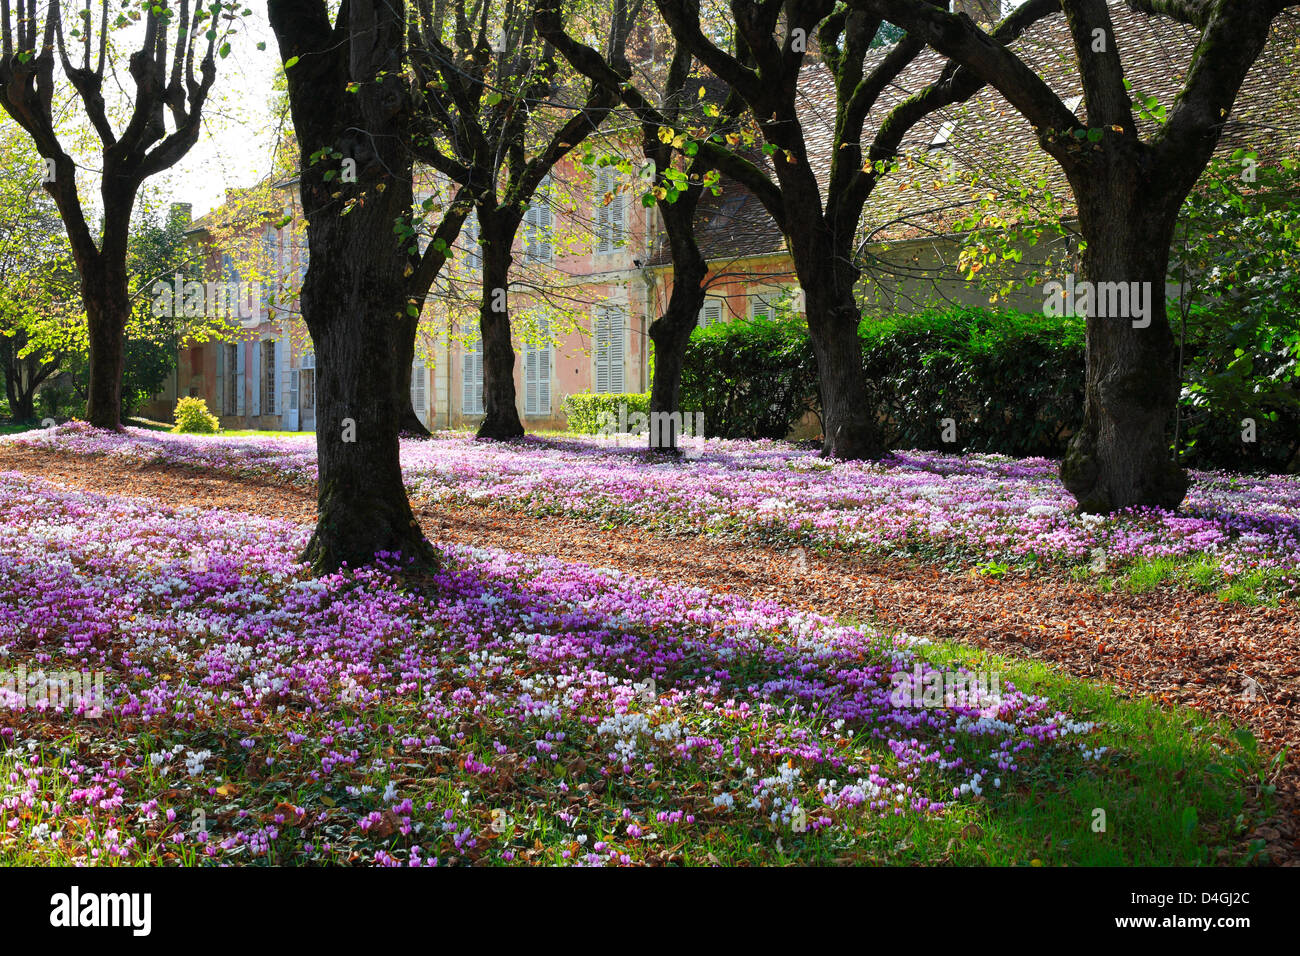 Cyclamen hederifolium - Carpet of Flowers in a French Garden. Stock Photo